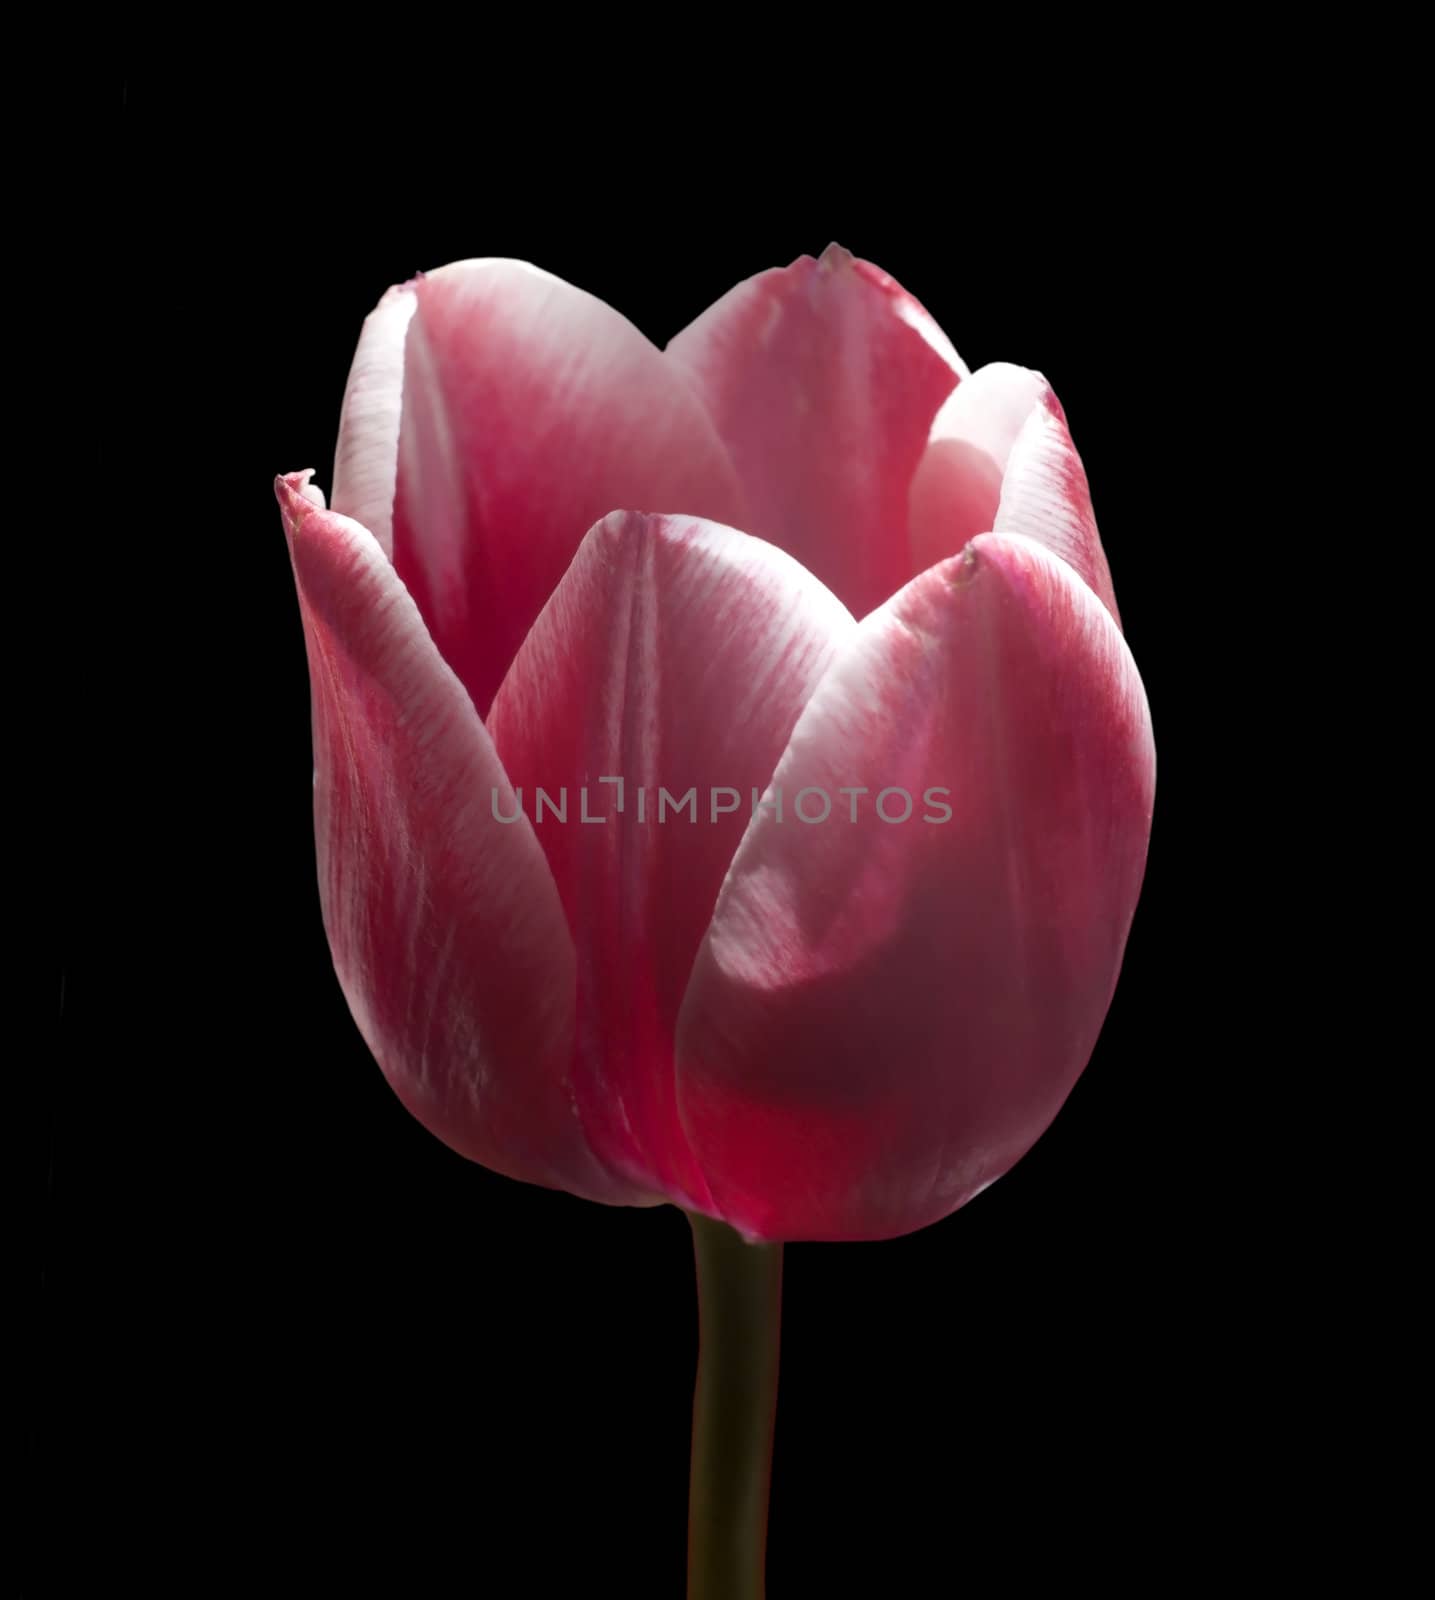 A general view of a tulip bud dark pink color on a black background